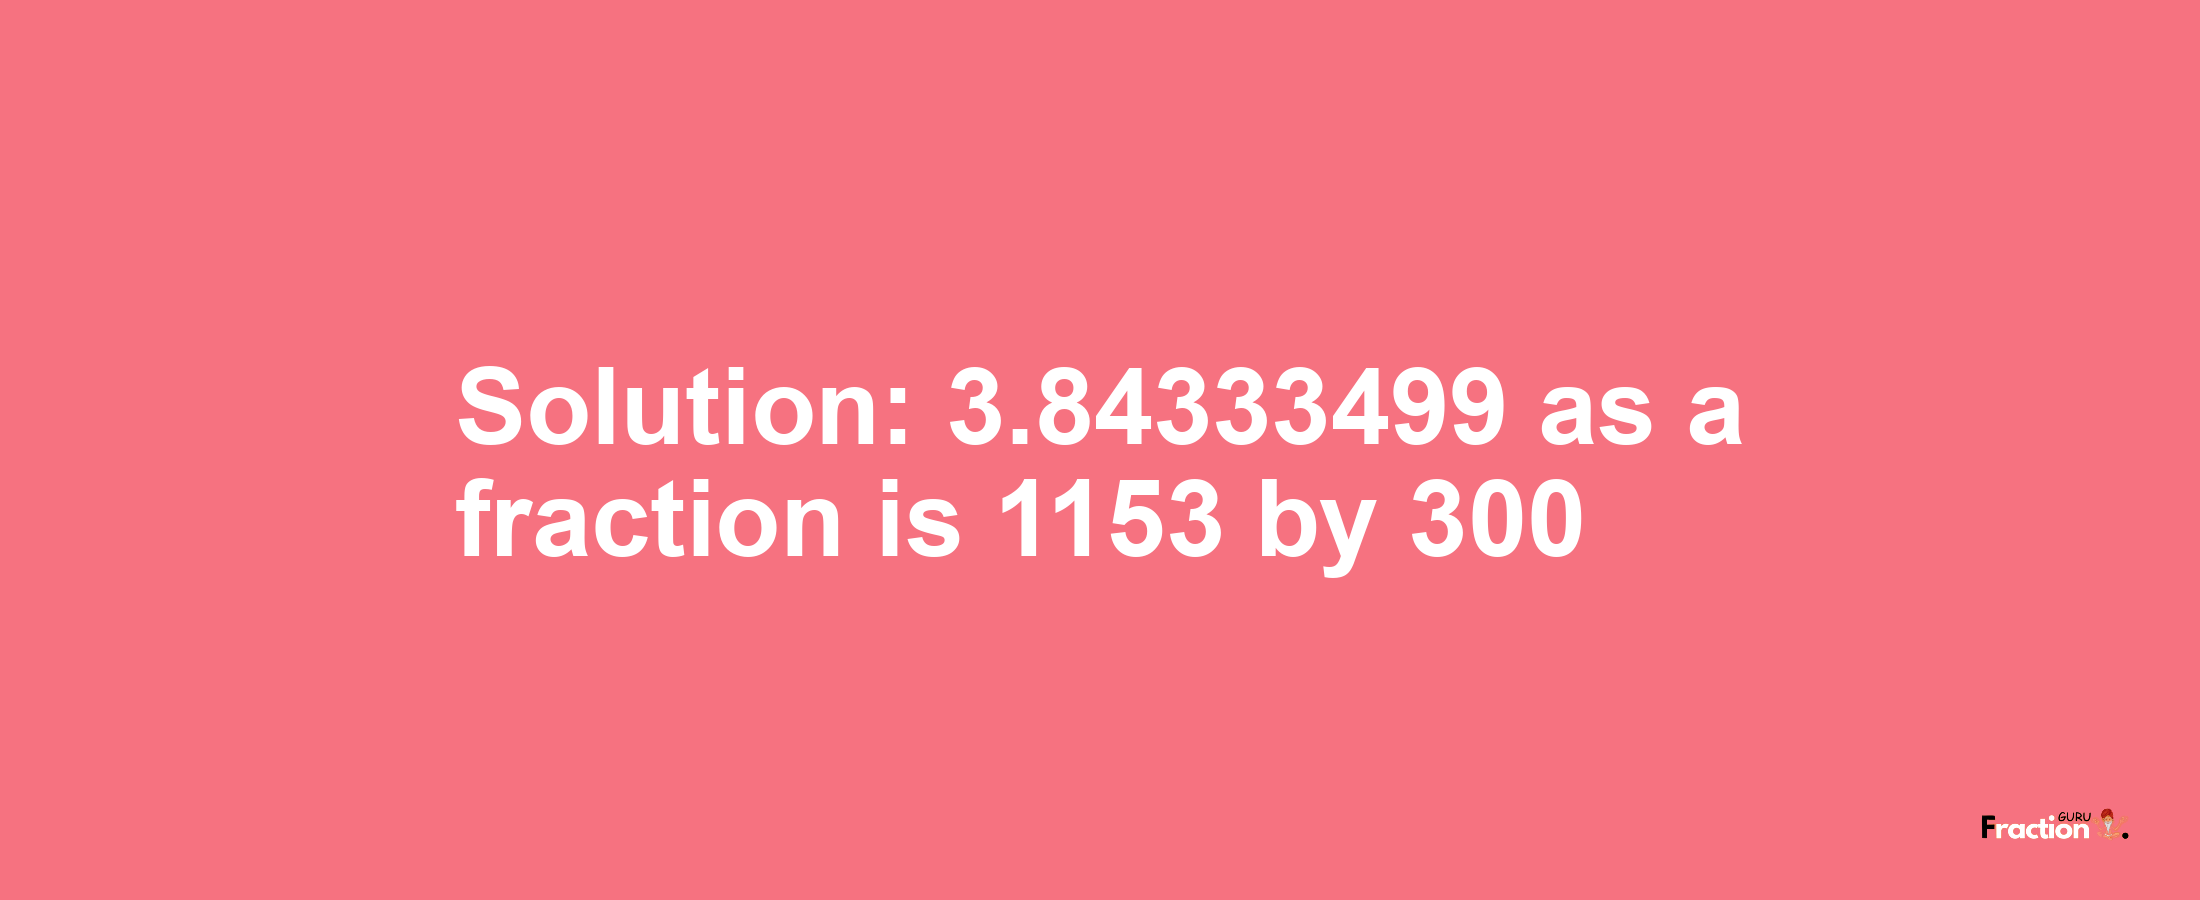 Solution:3.84333499 as a fraction is 1153/300